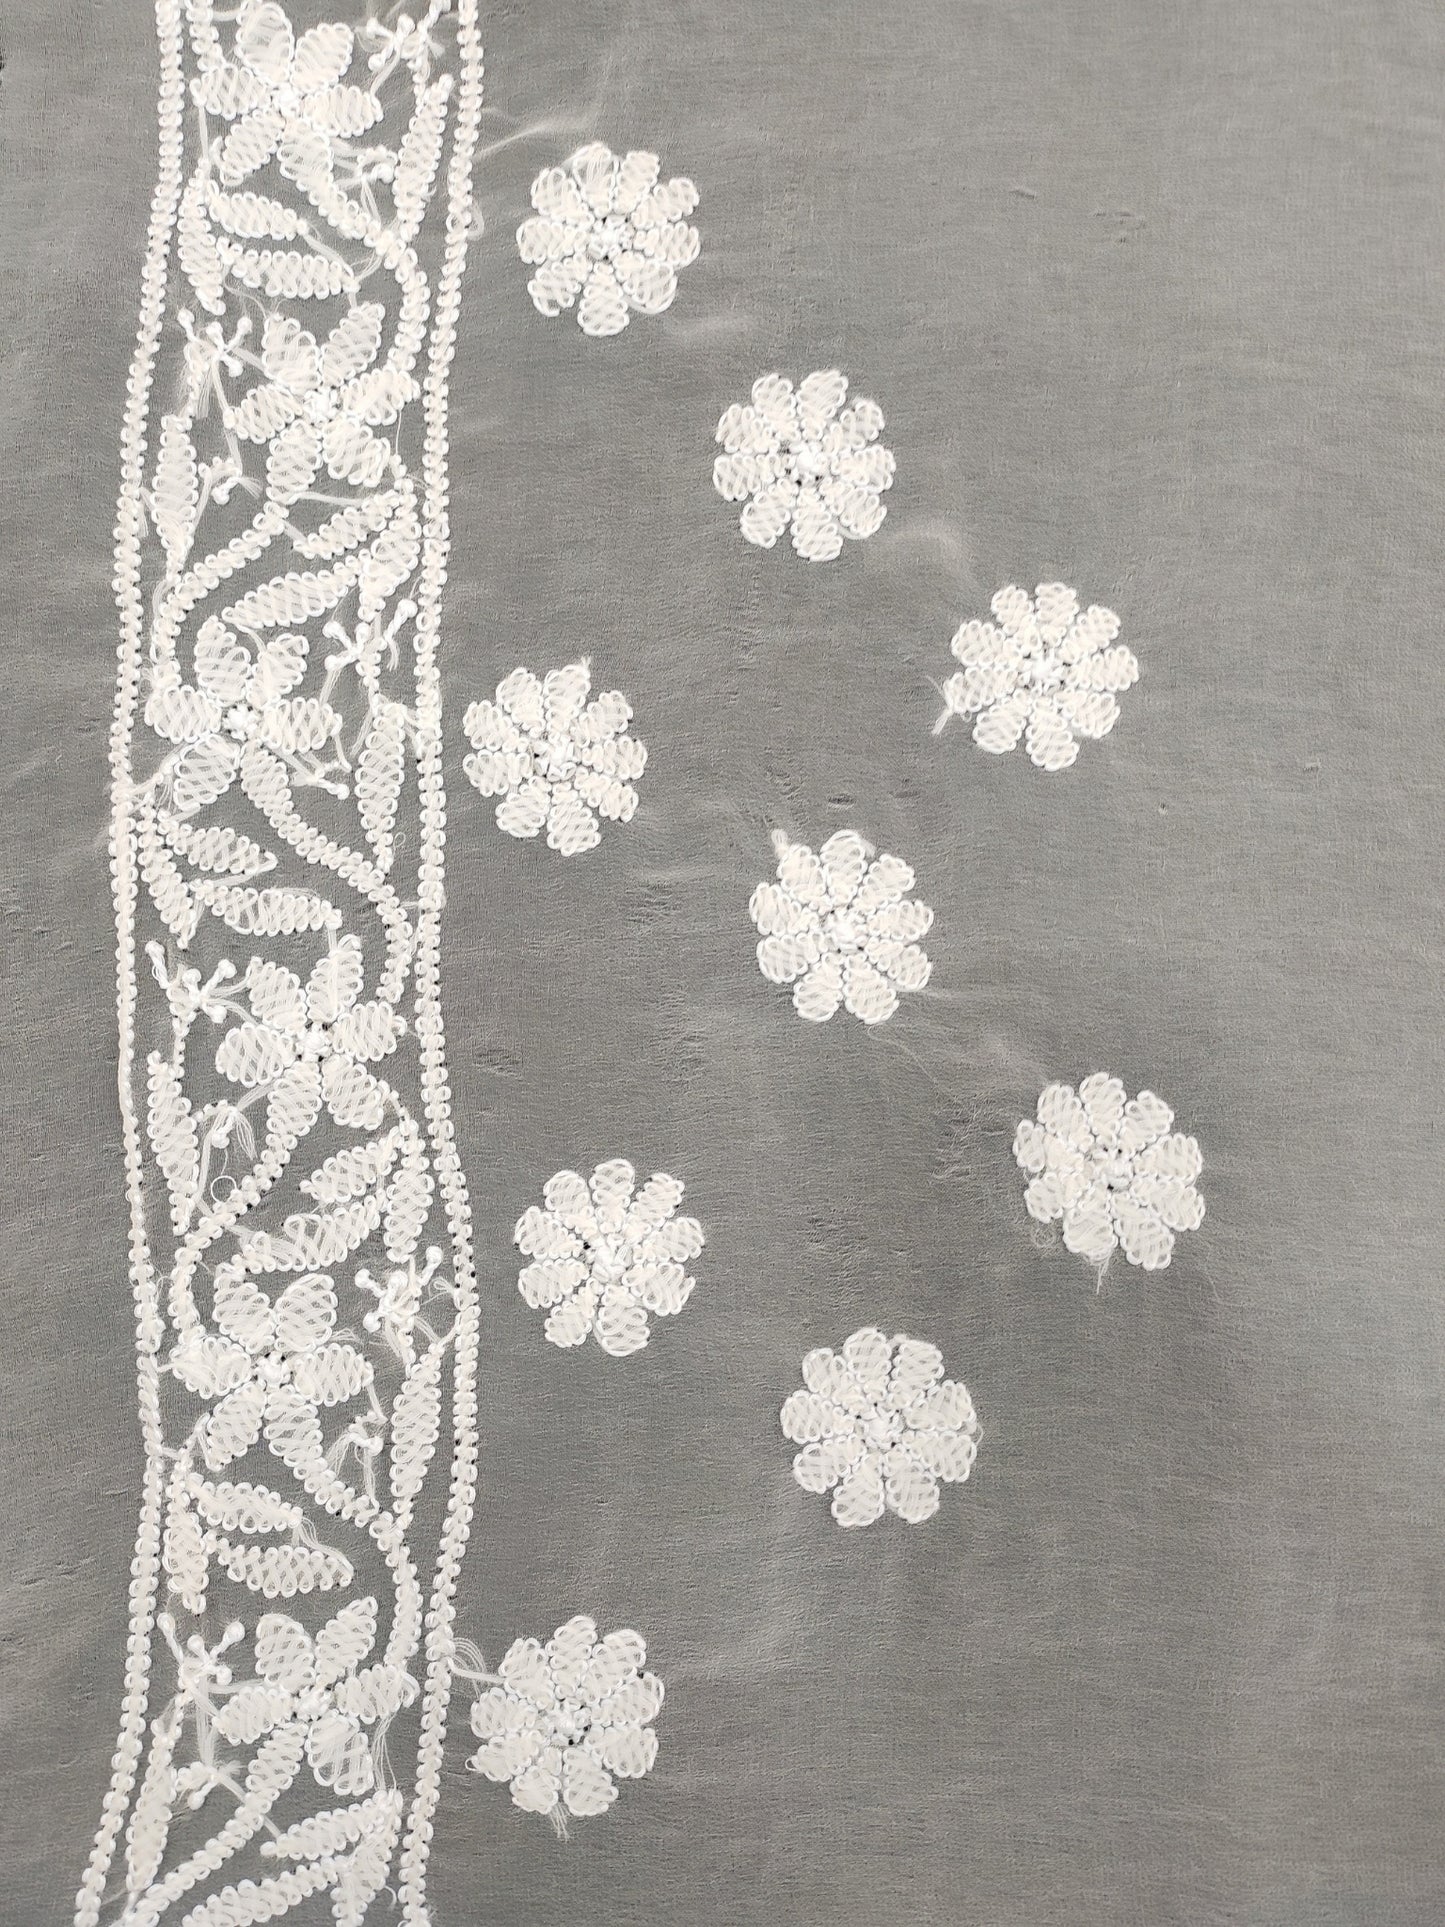 Shyamal Chikan Hand Embroidered Beige Georgette Lucknowi Chikankari Skirt Saree With Blouse Piece - S21932